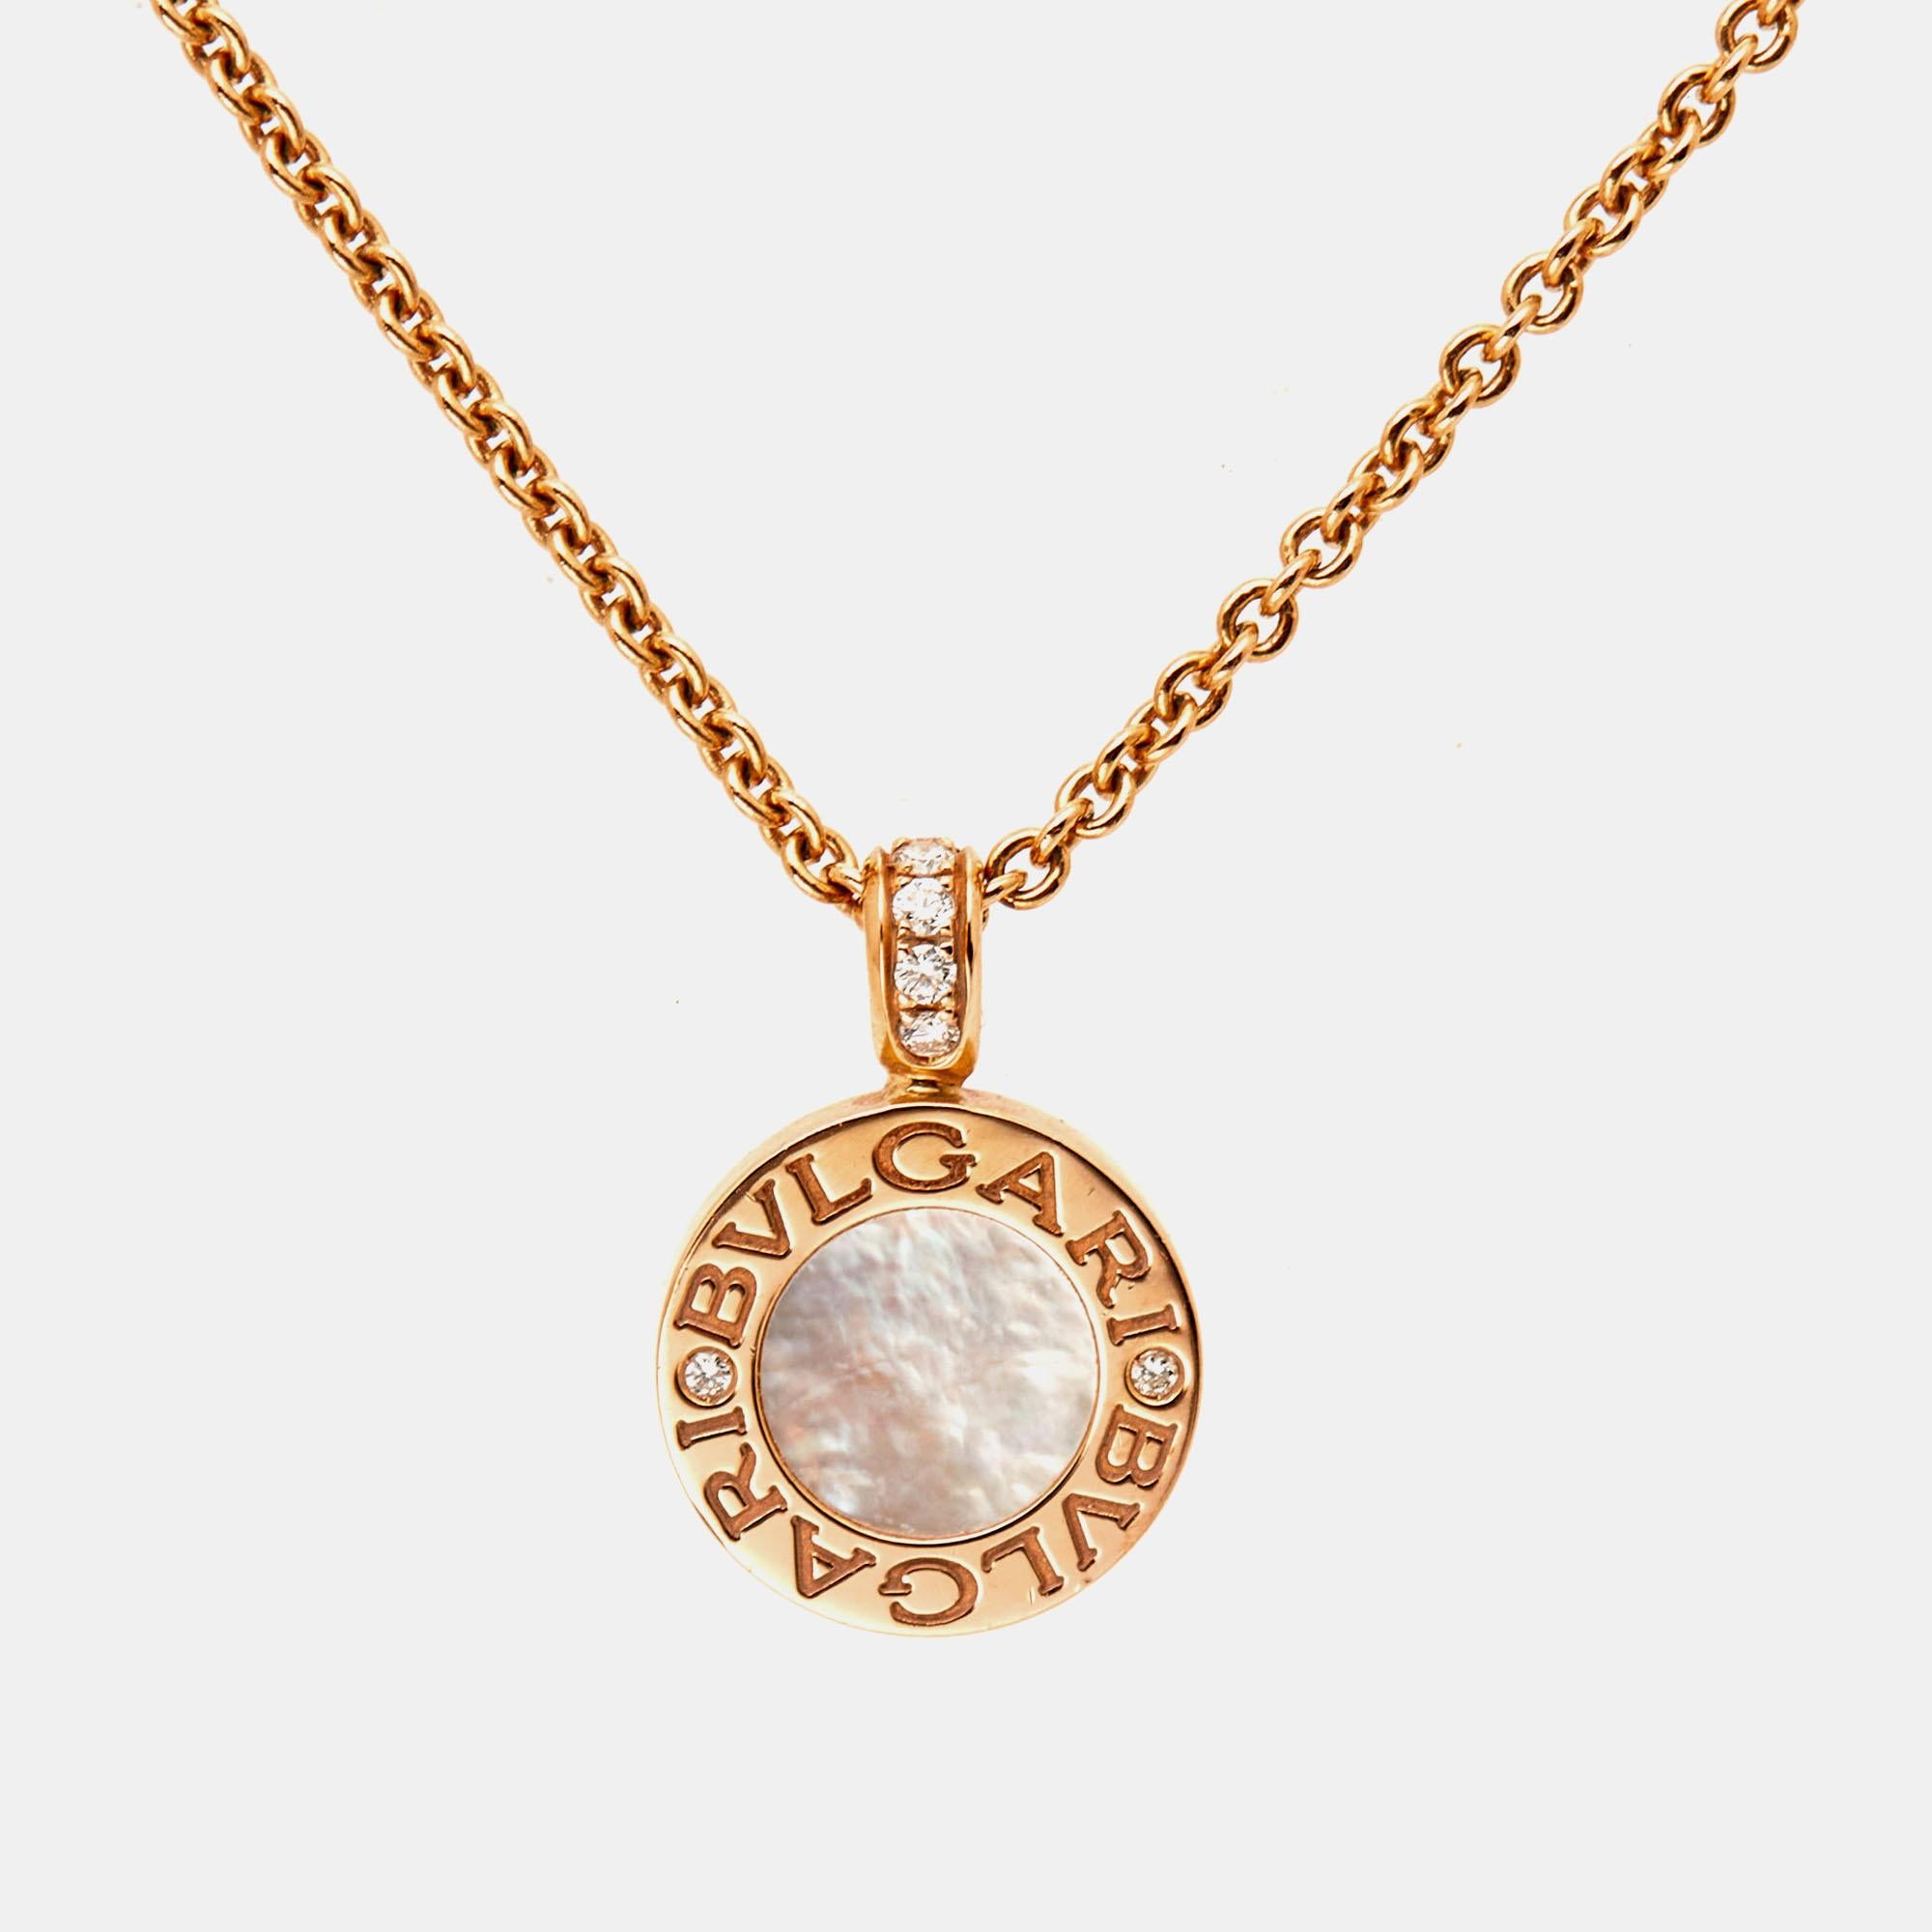 This Bvlgari necklace speaks beauty with its signature details. Crafted using 18k rose gold, the Bvlgari Bvlgari necklace has a diamond-accented circular motif with Mother of Pearl on one side and onyx on the other. The piece will be a wonderful